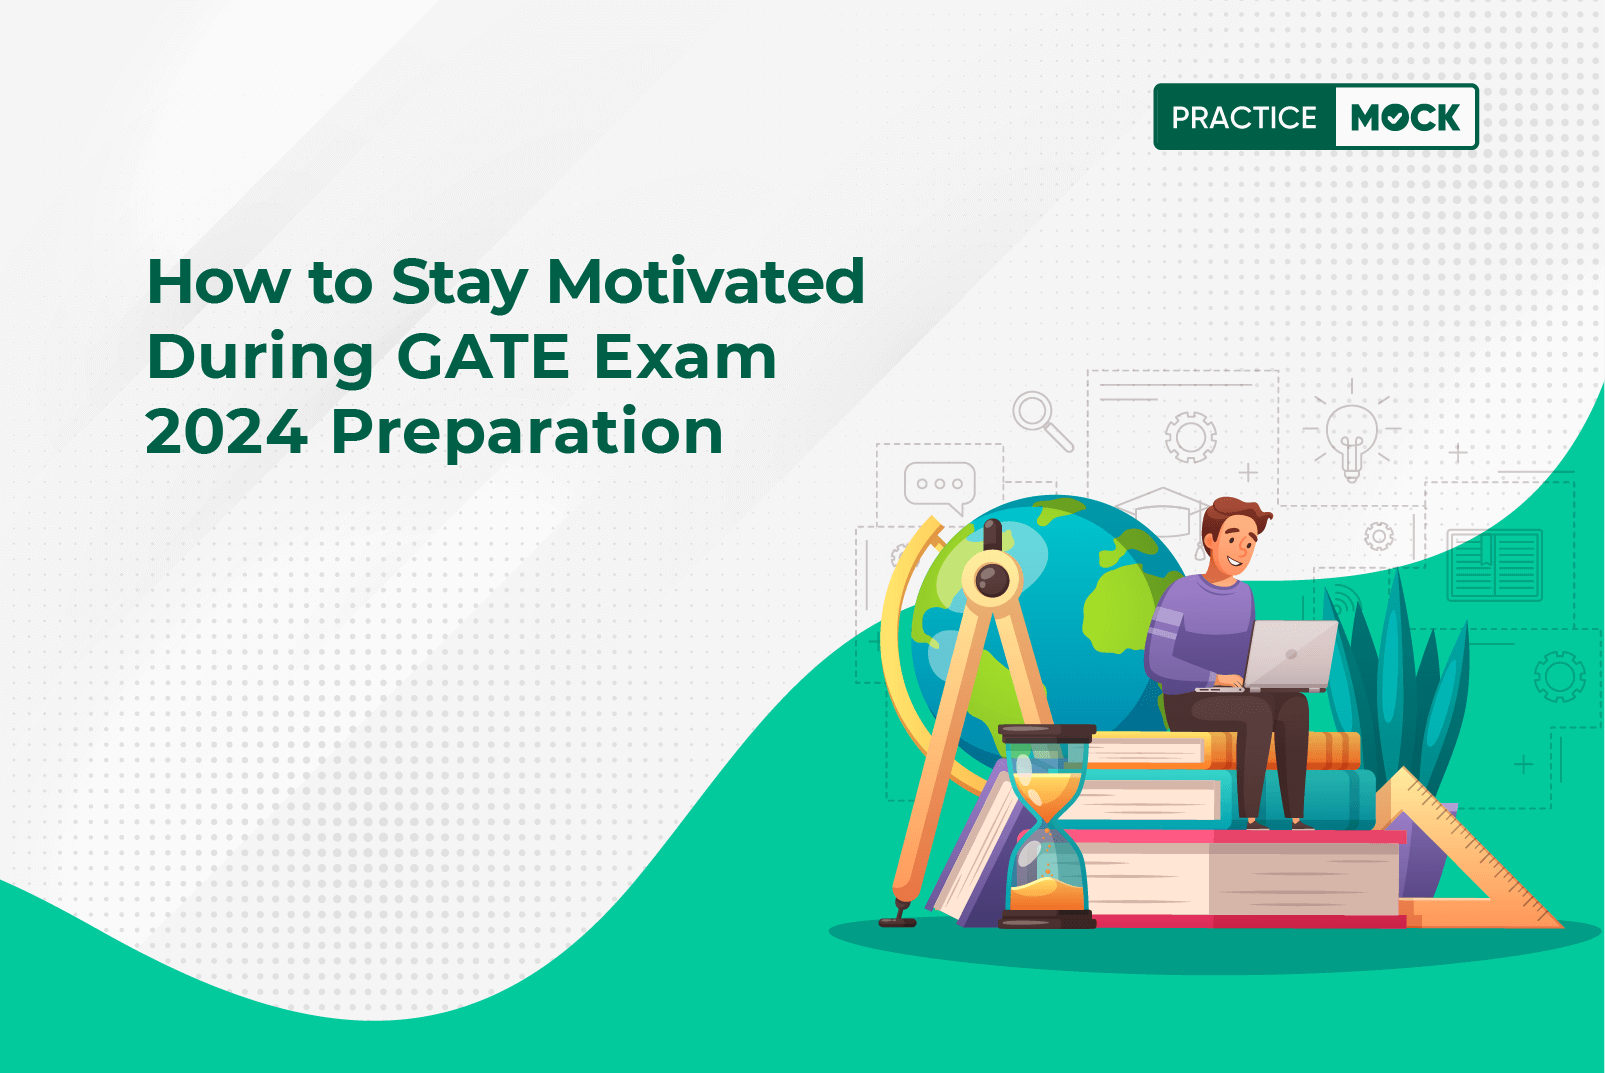 How to stay motivated during GATE exam preparation